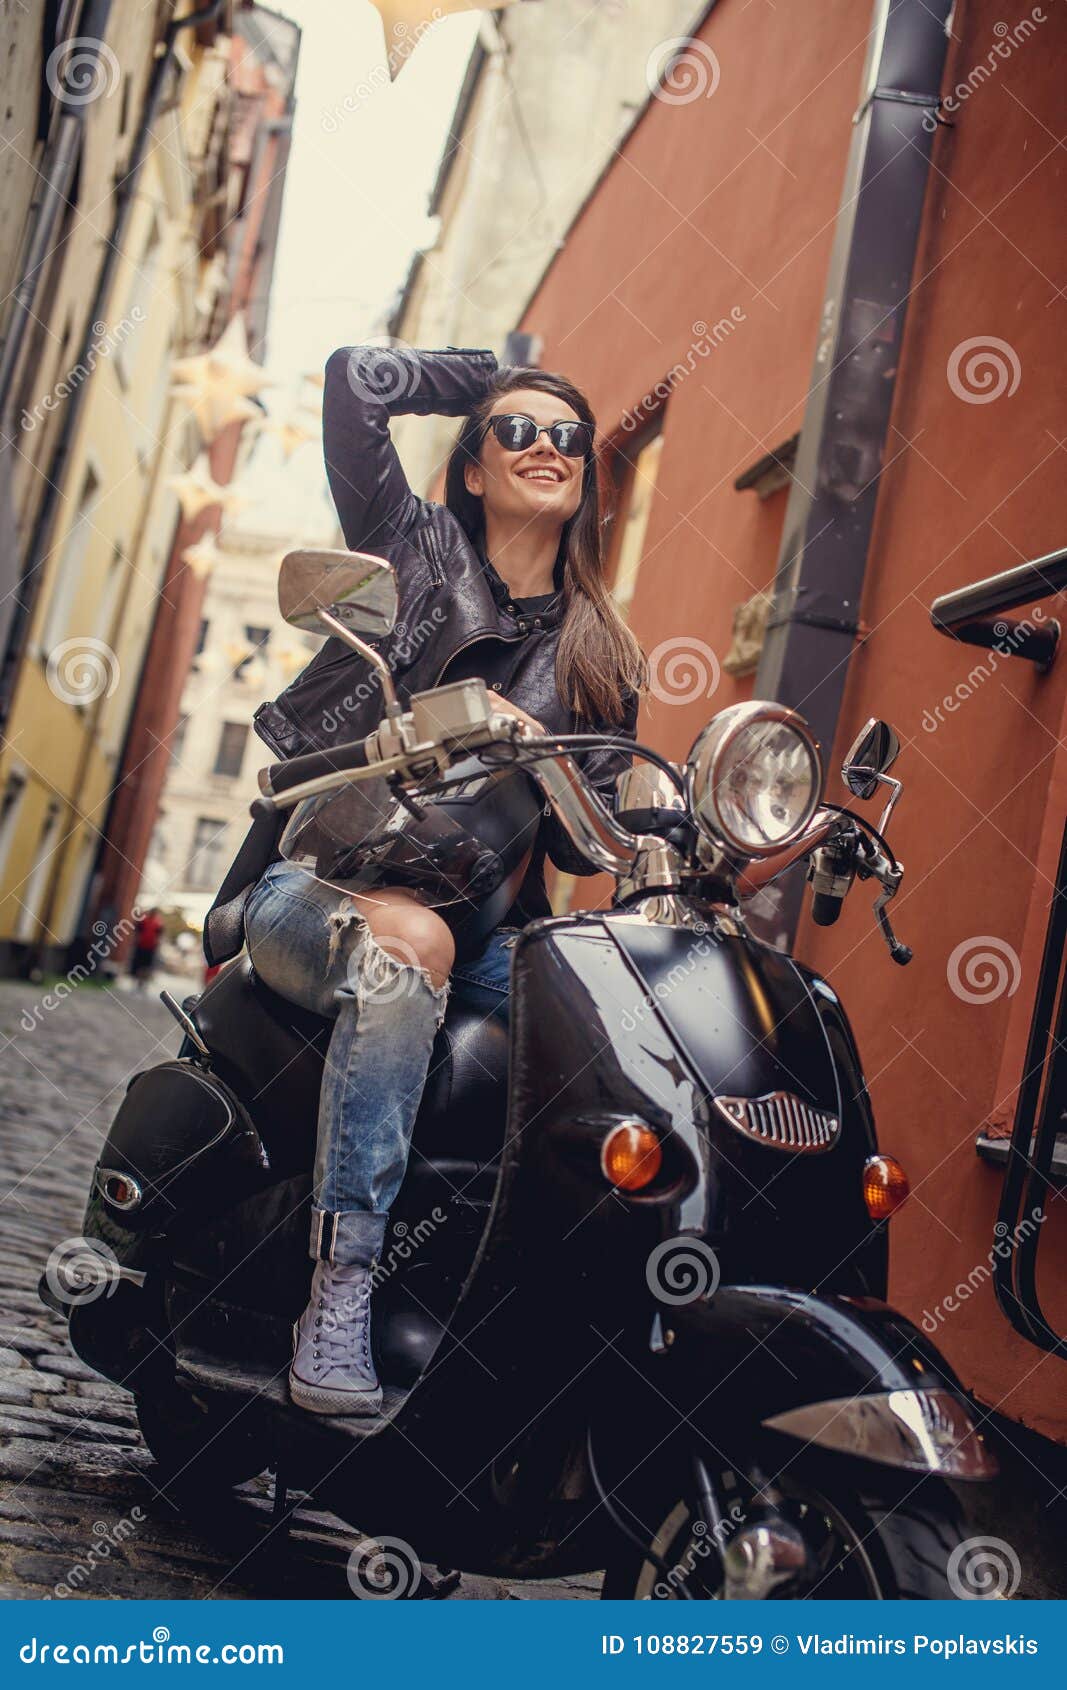 Girl on Moto Scooter. Stock - human, scooter: 108827559